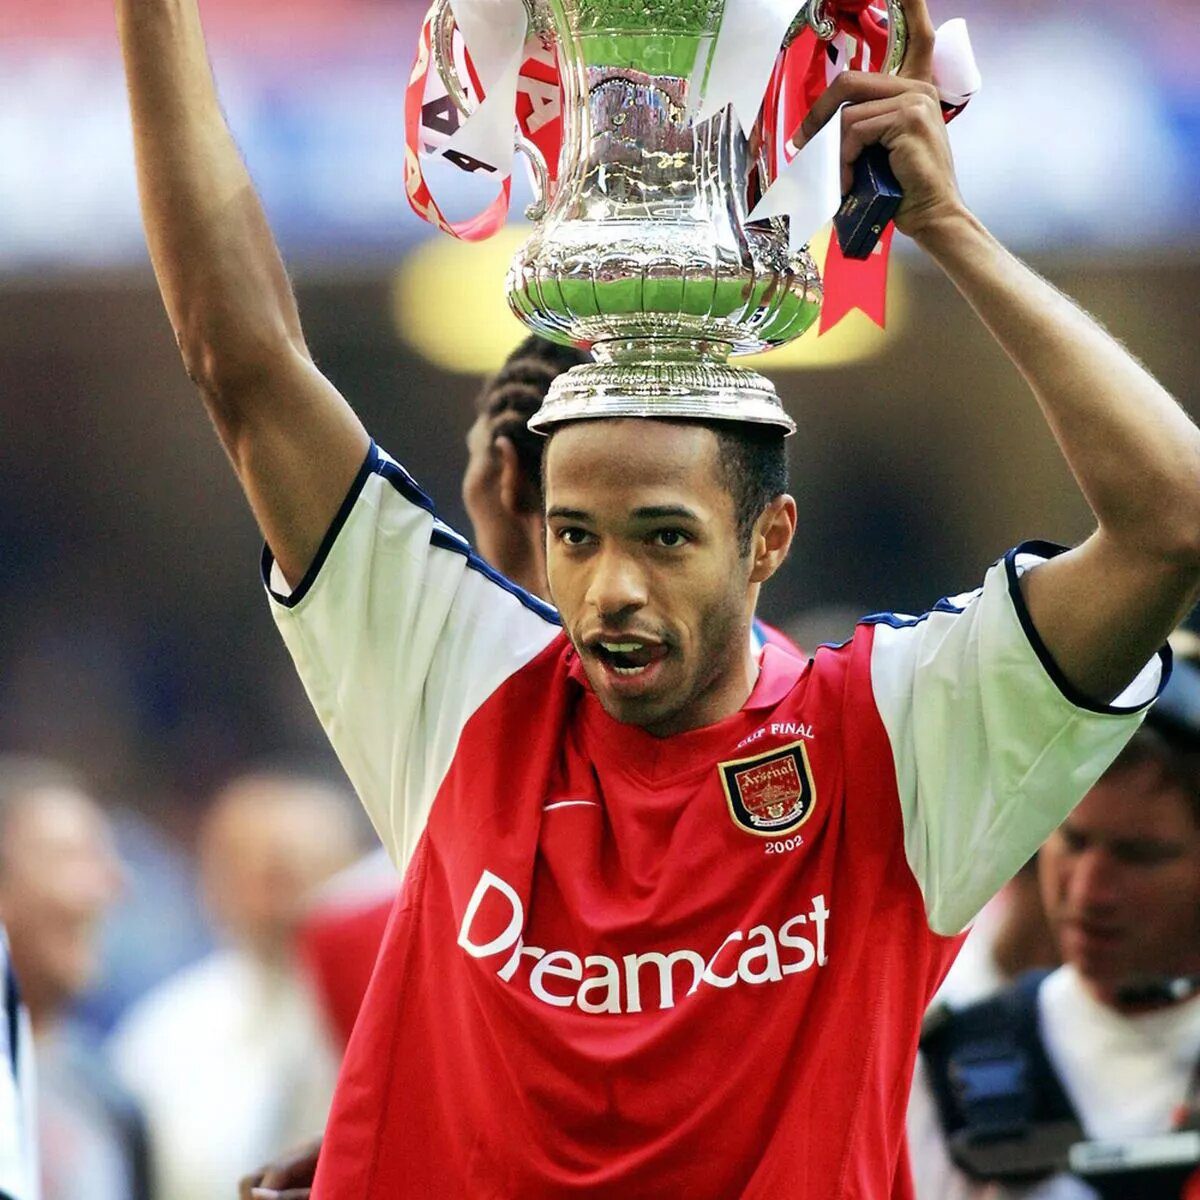 Thierry Henry for Arsenal in the 2002 03 Season Image via The Mirror Top 5 players in the Premier League with the most goal contributions in one season